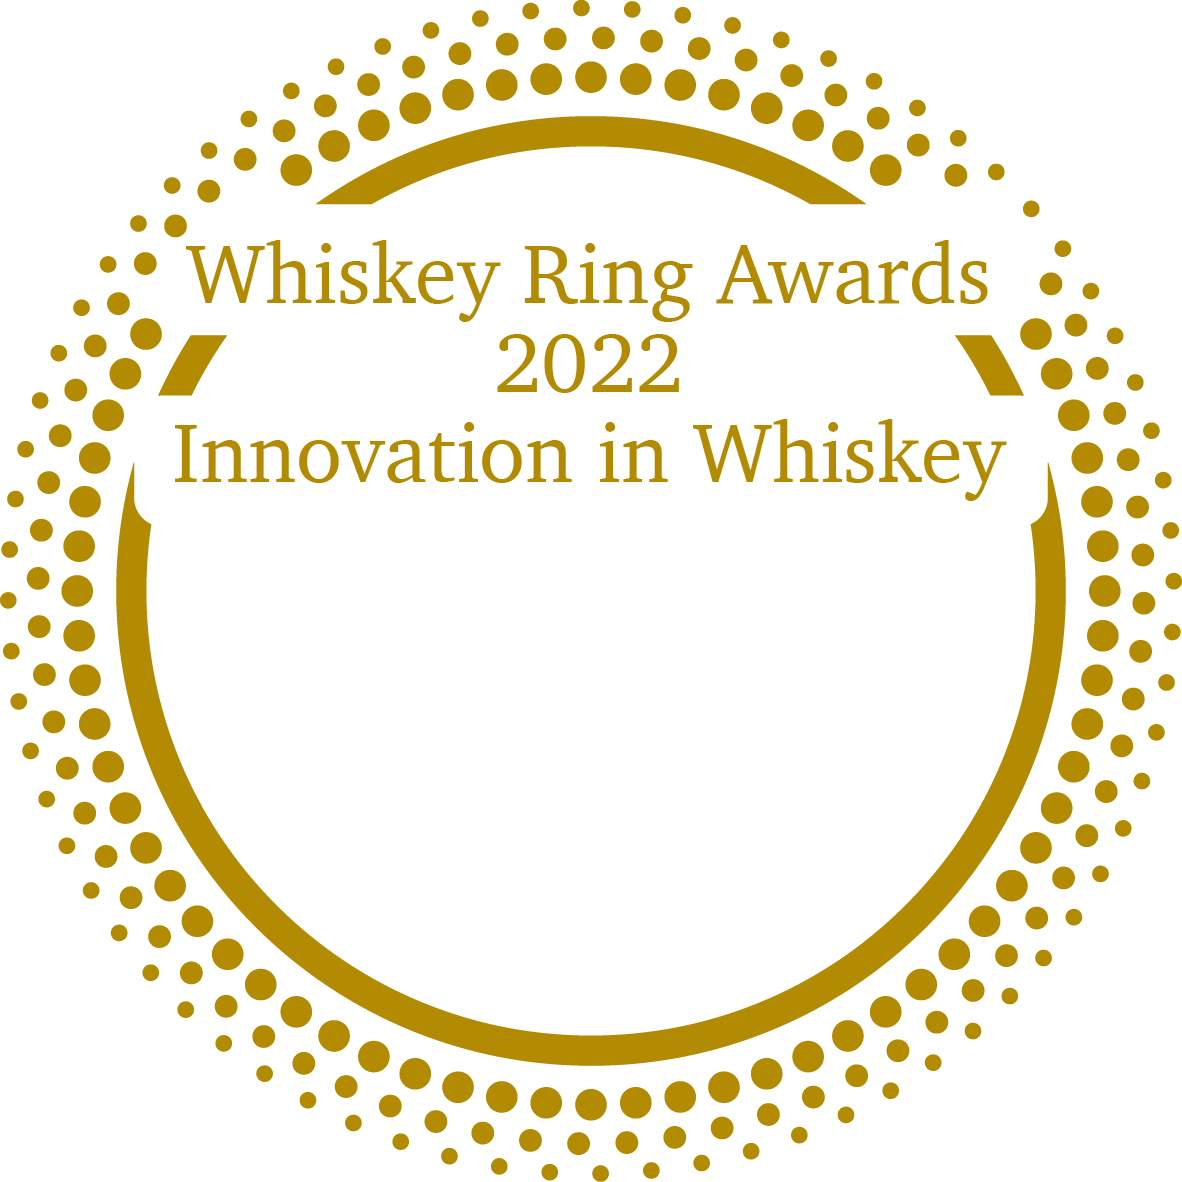 Innovation In Whisky